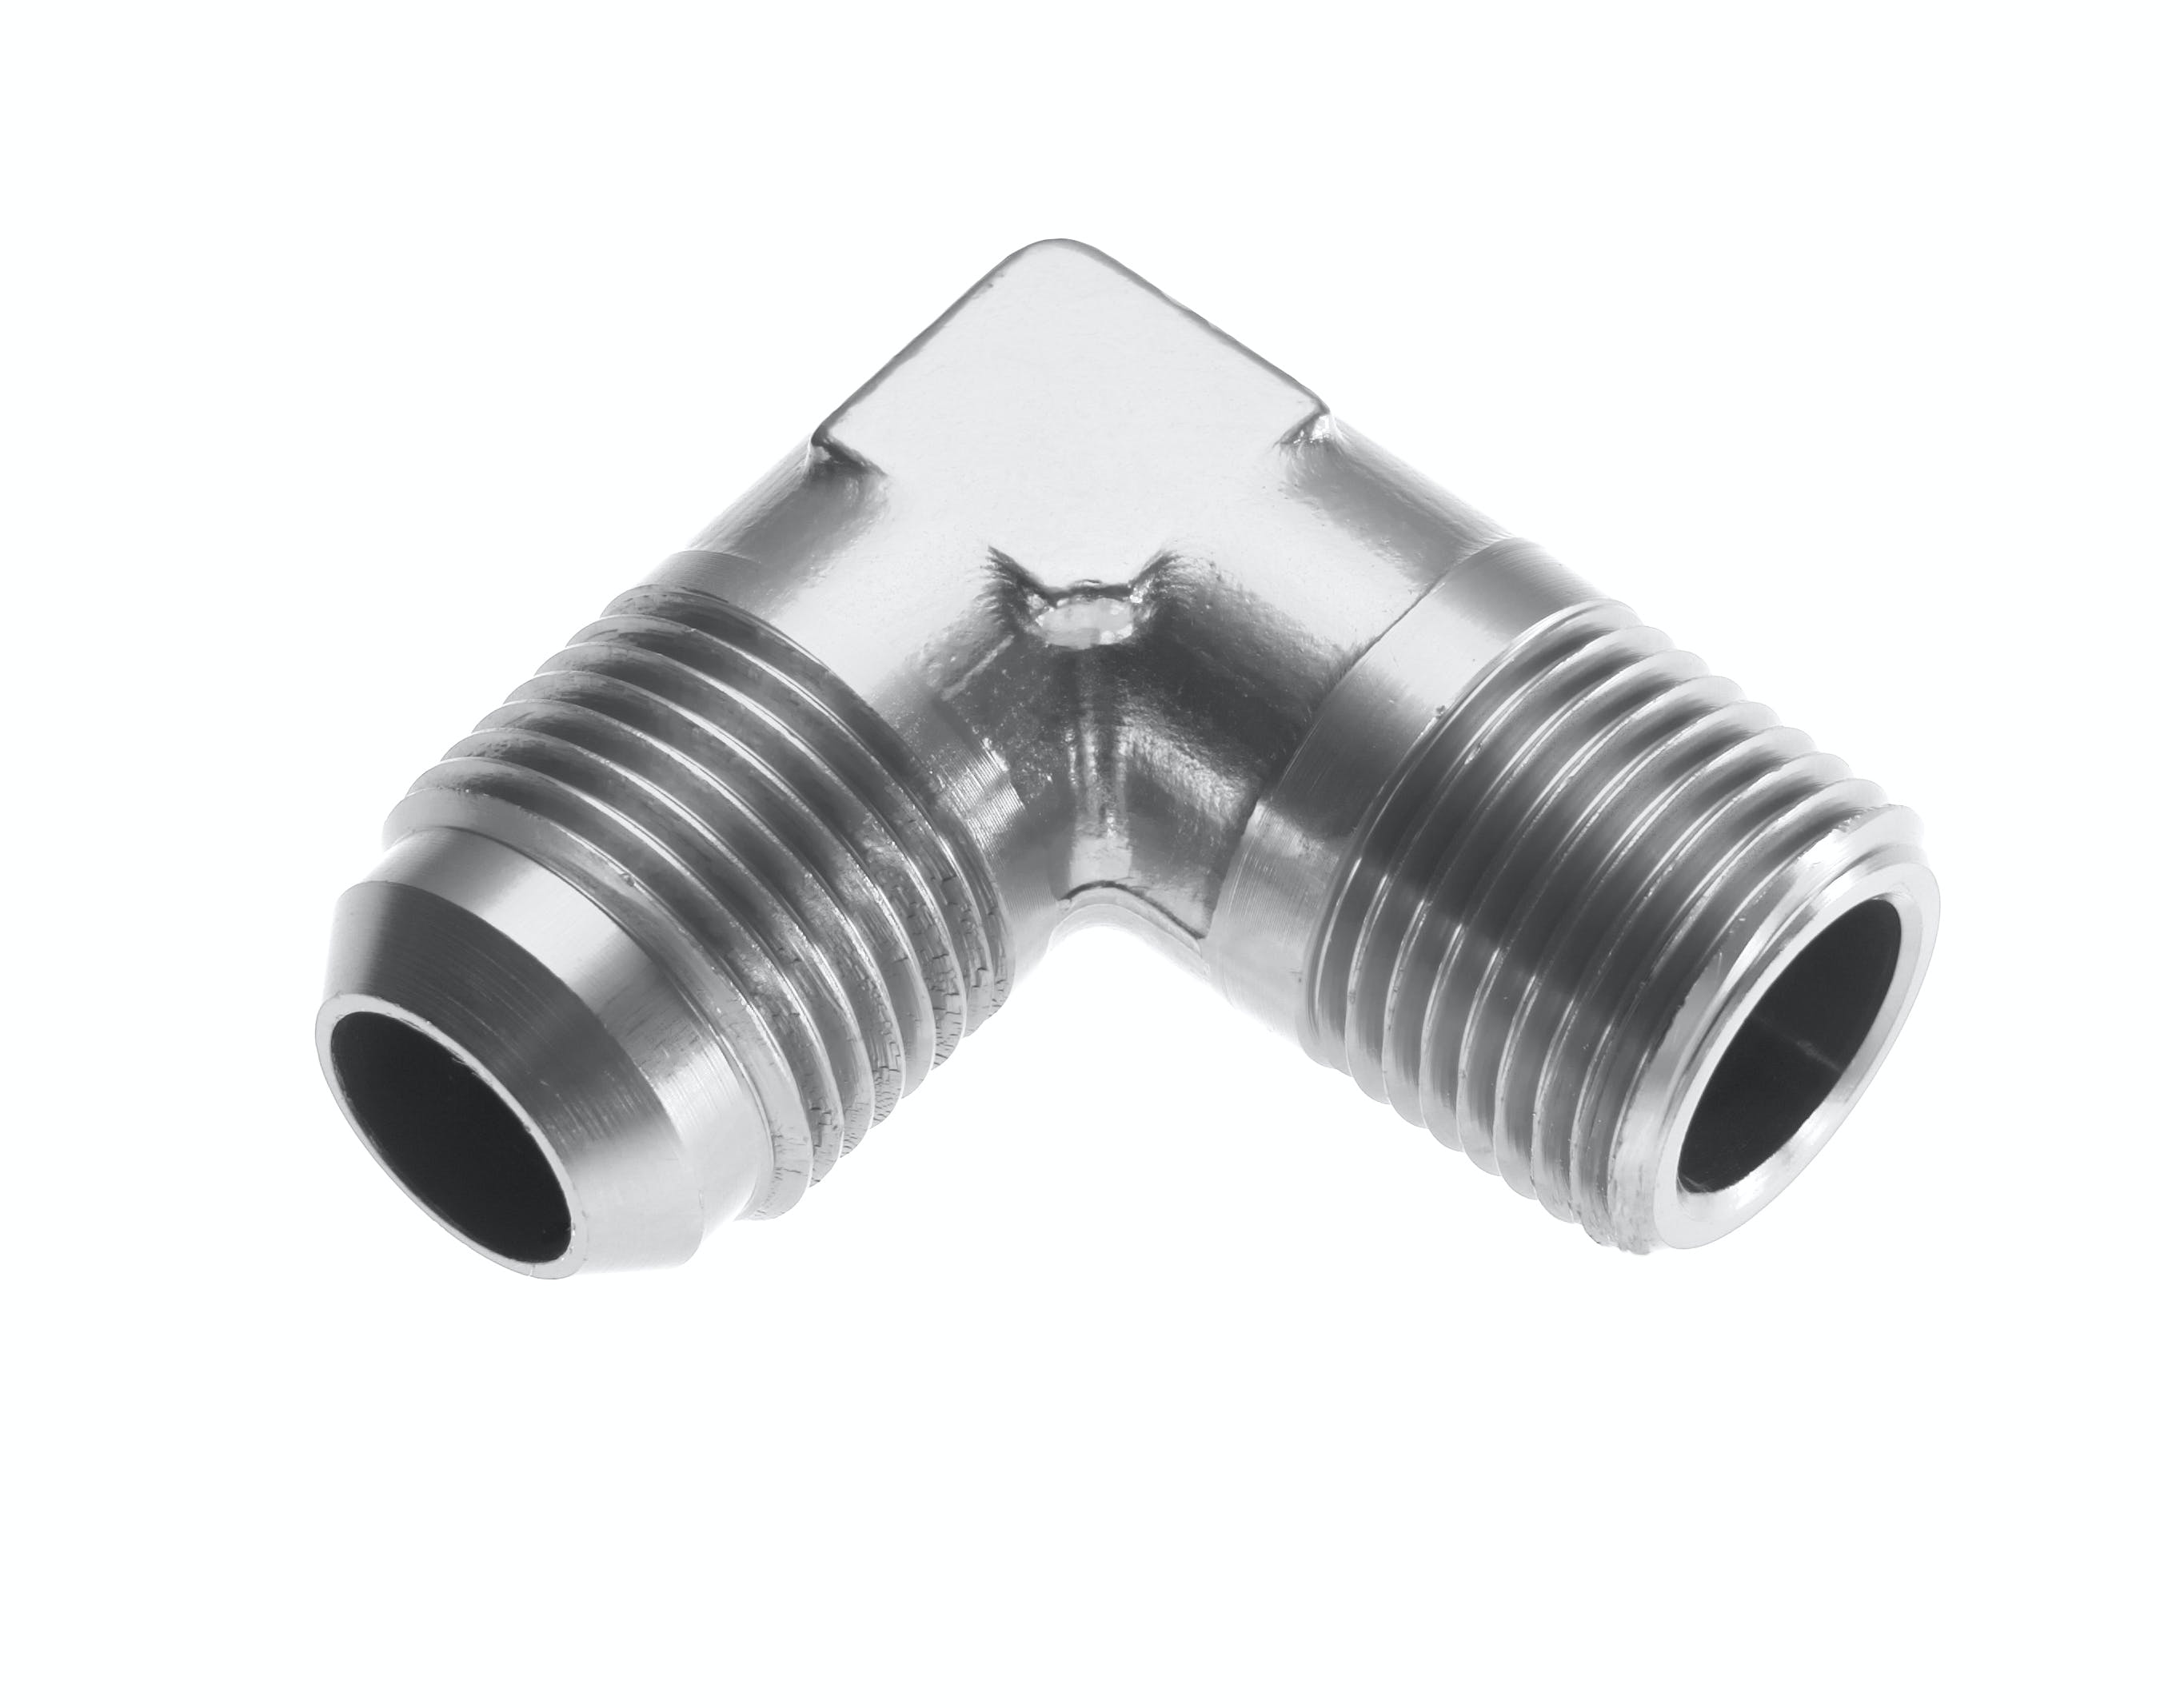 Redhorse Performance 822-06-08-5 -06 90 degree Male adapter to -08 (1/2in) NPT Male - clear